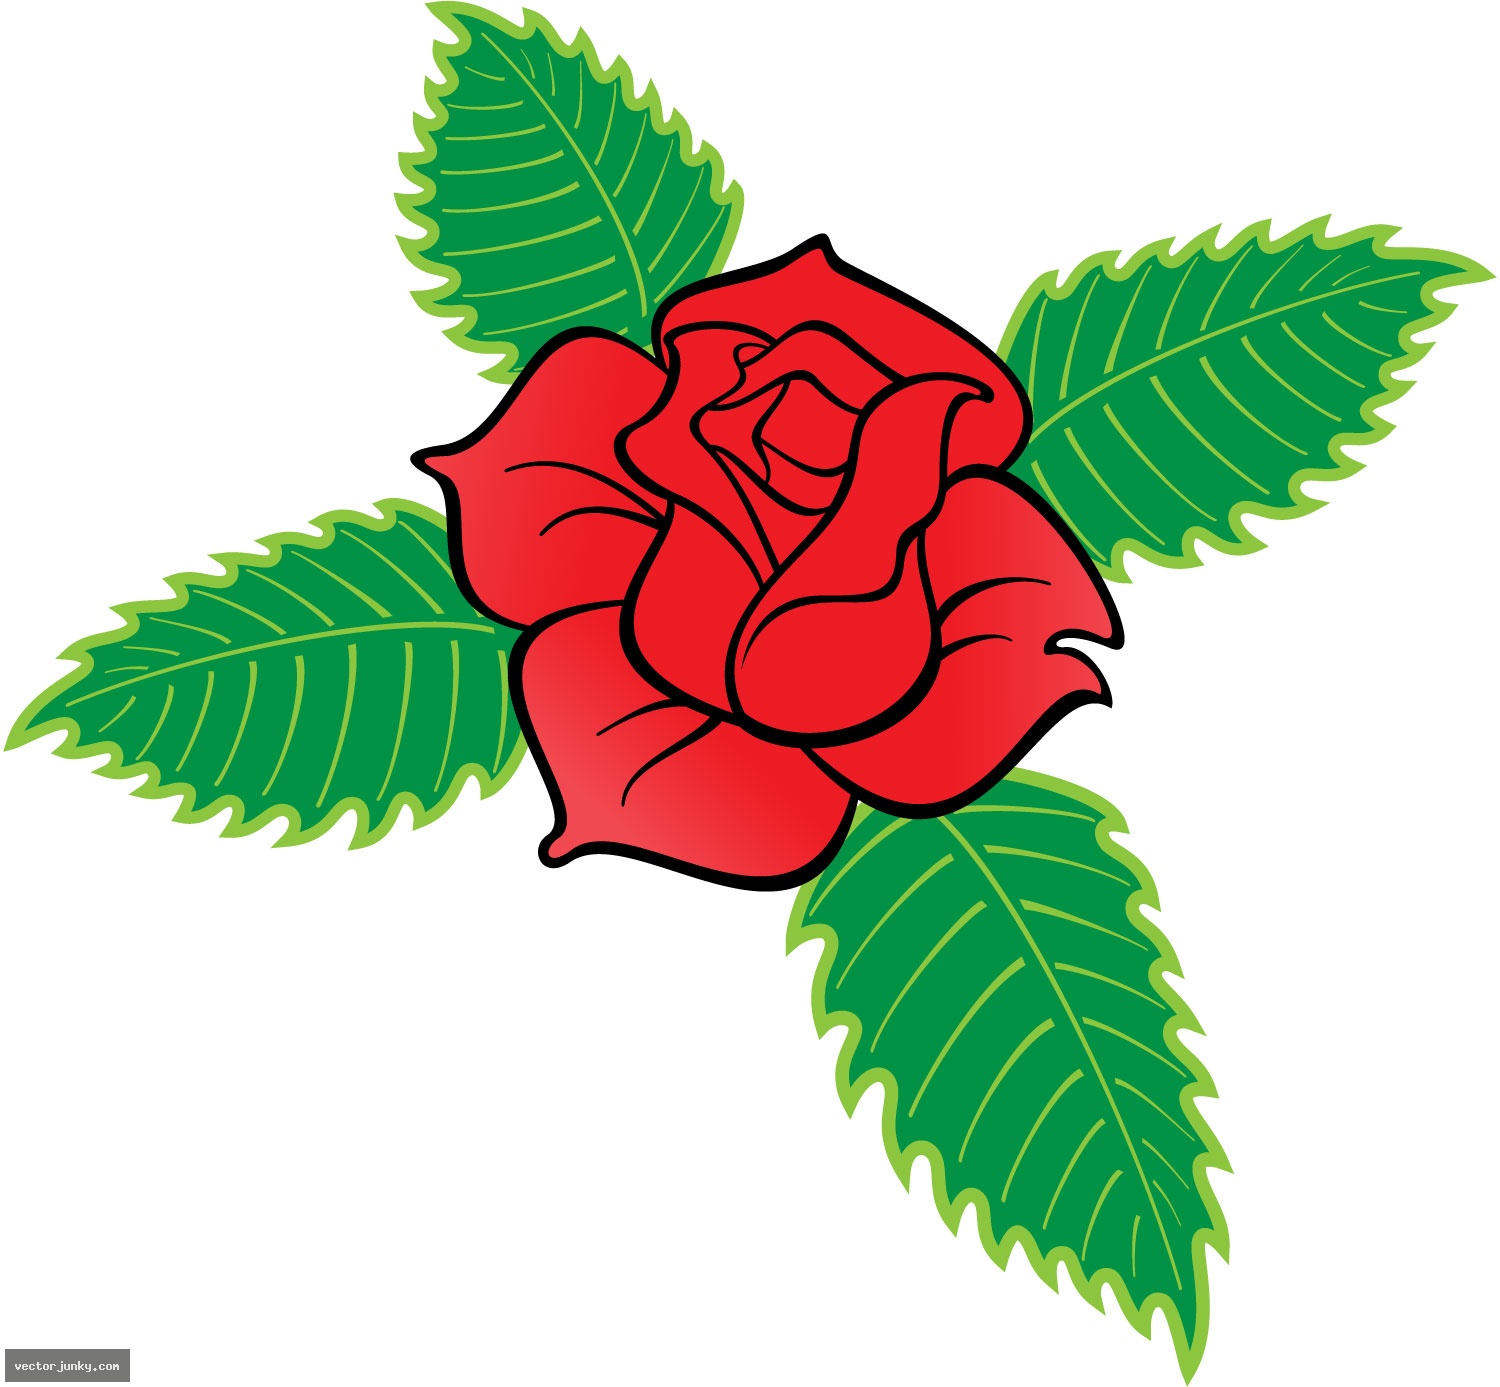 roses clip art free download - photo #9